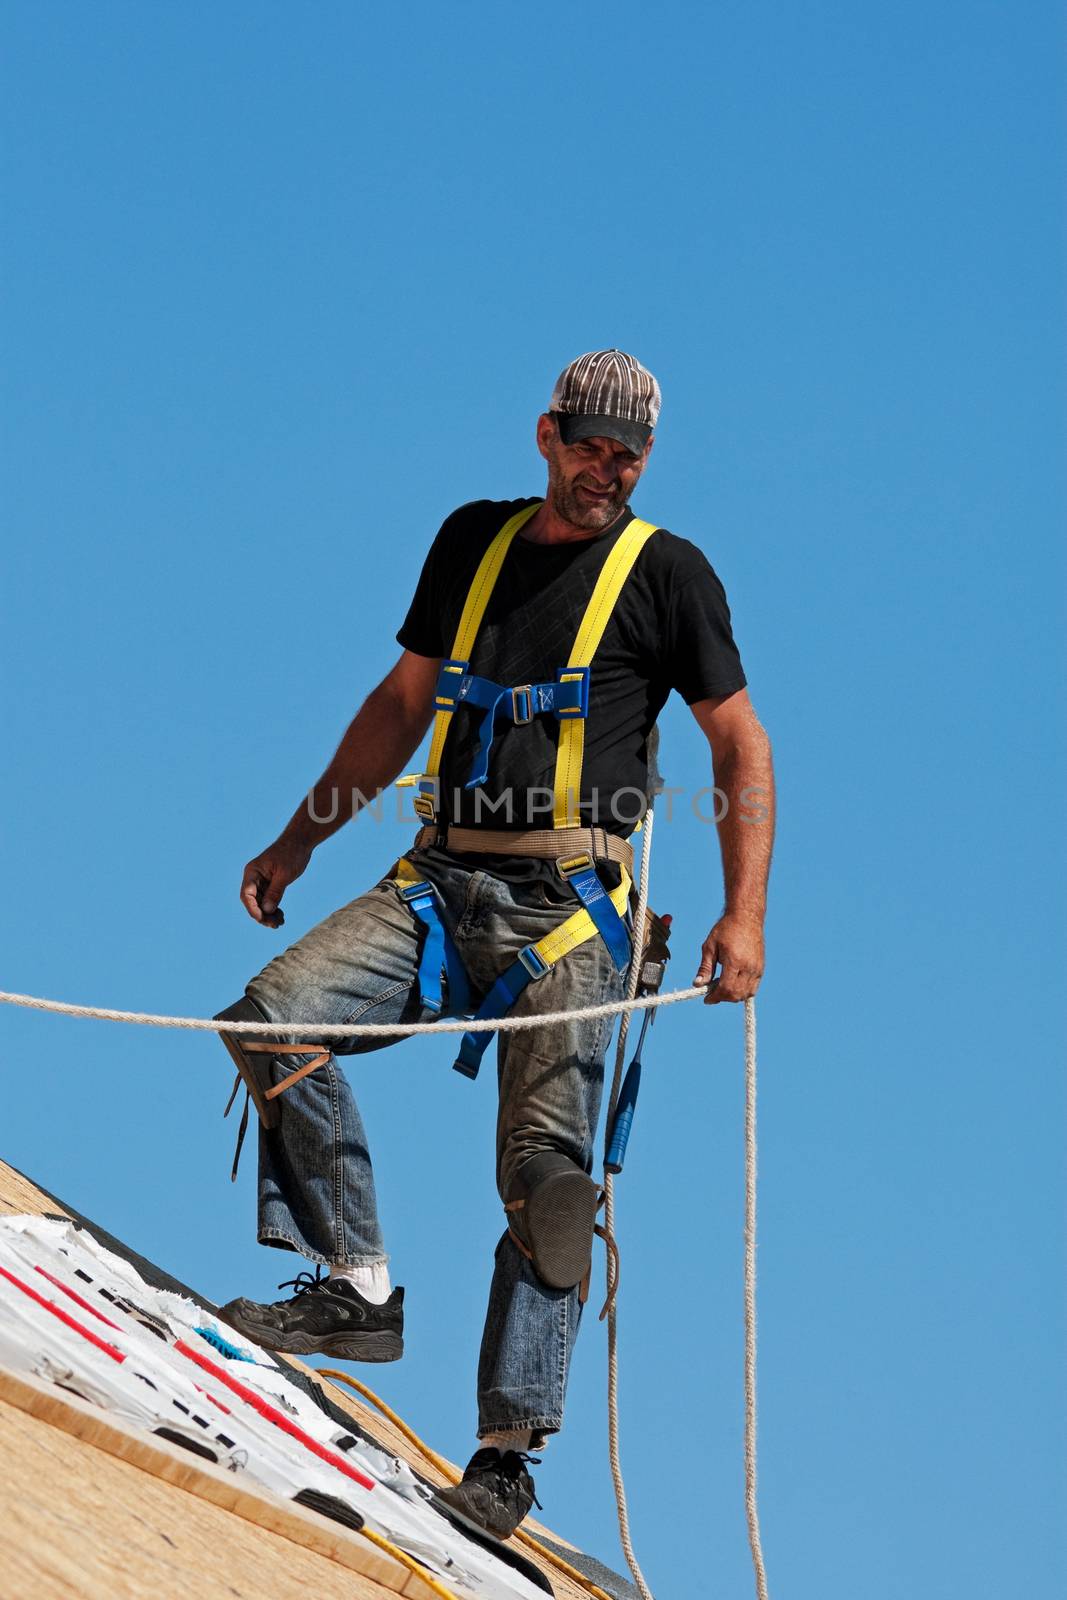 Roofer with safety harness shingling a roof with a steep pitch.